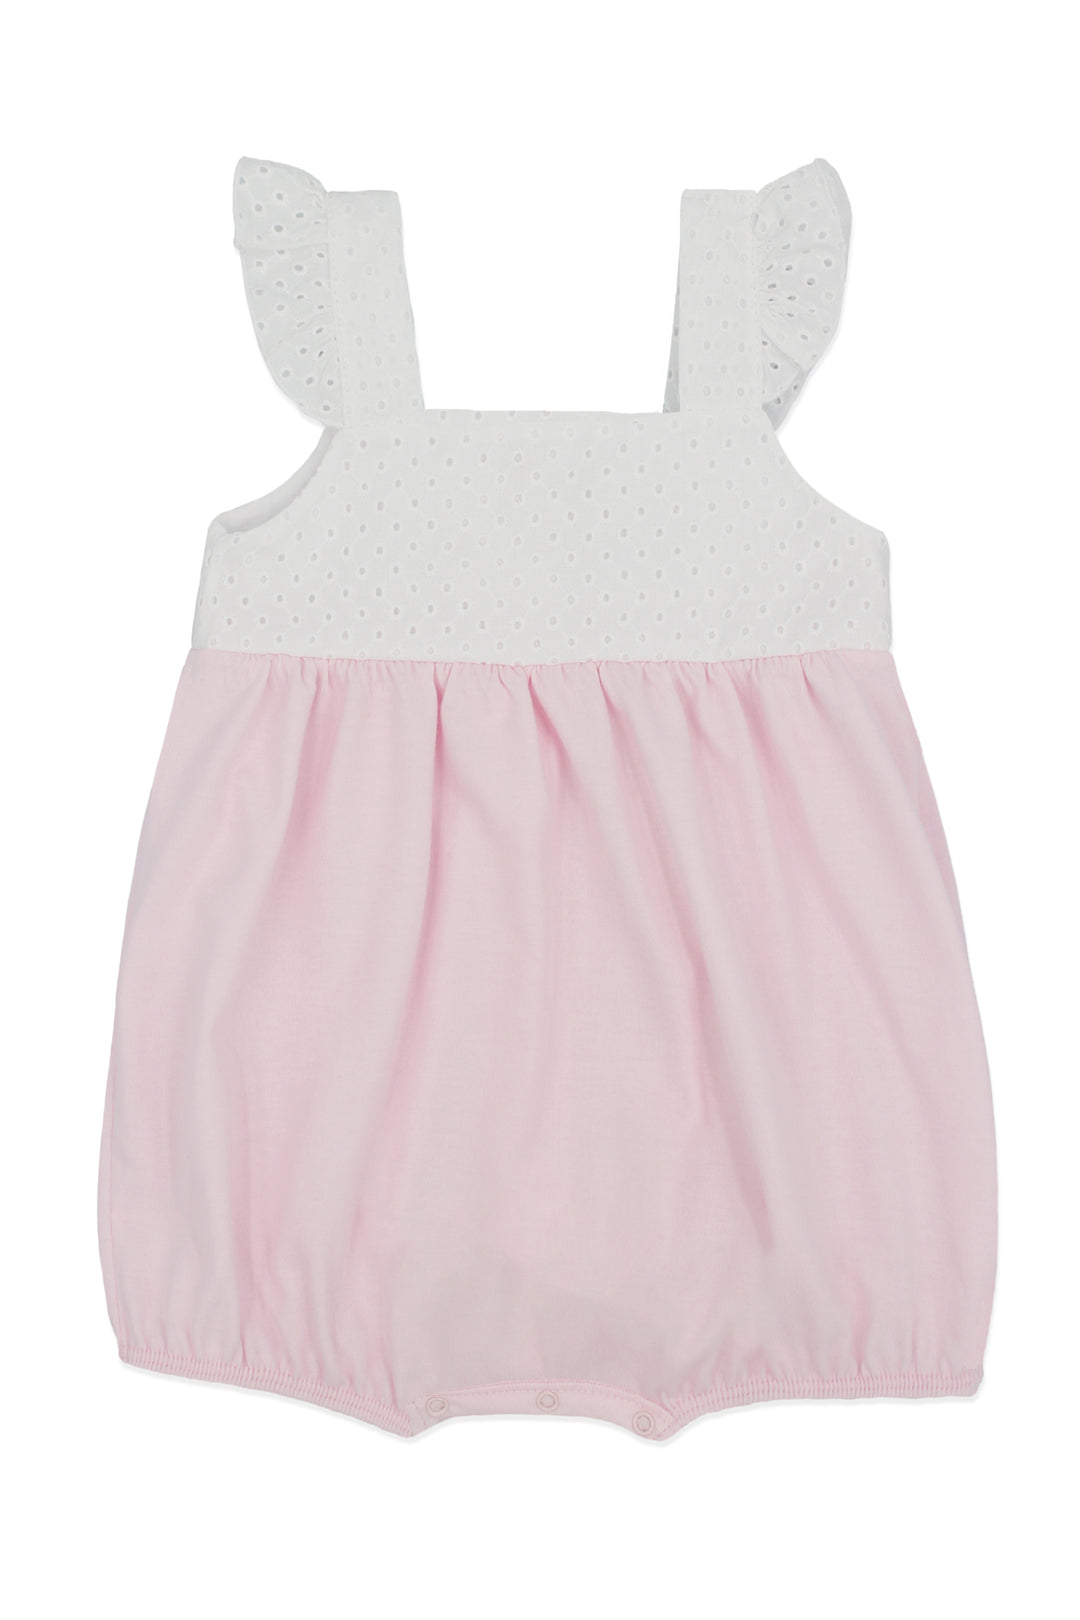 Rapife PREORDER "Sienna" Pink Broderie Anglaise Romper | Millie and John